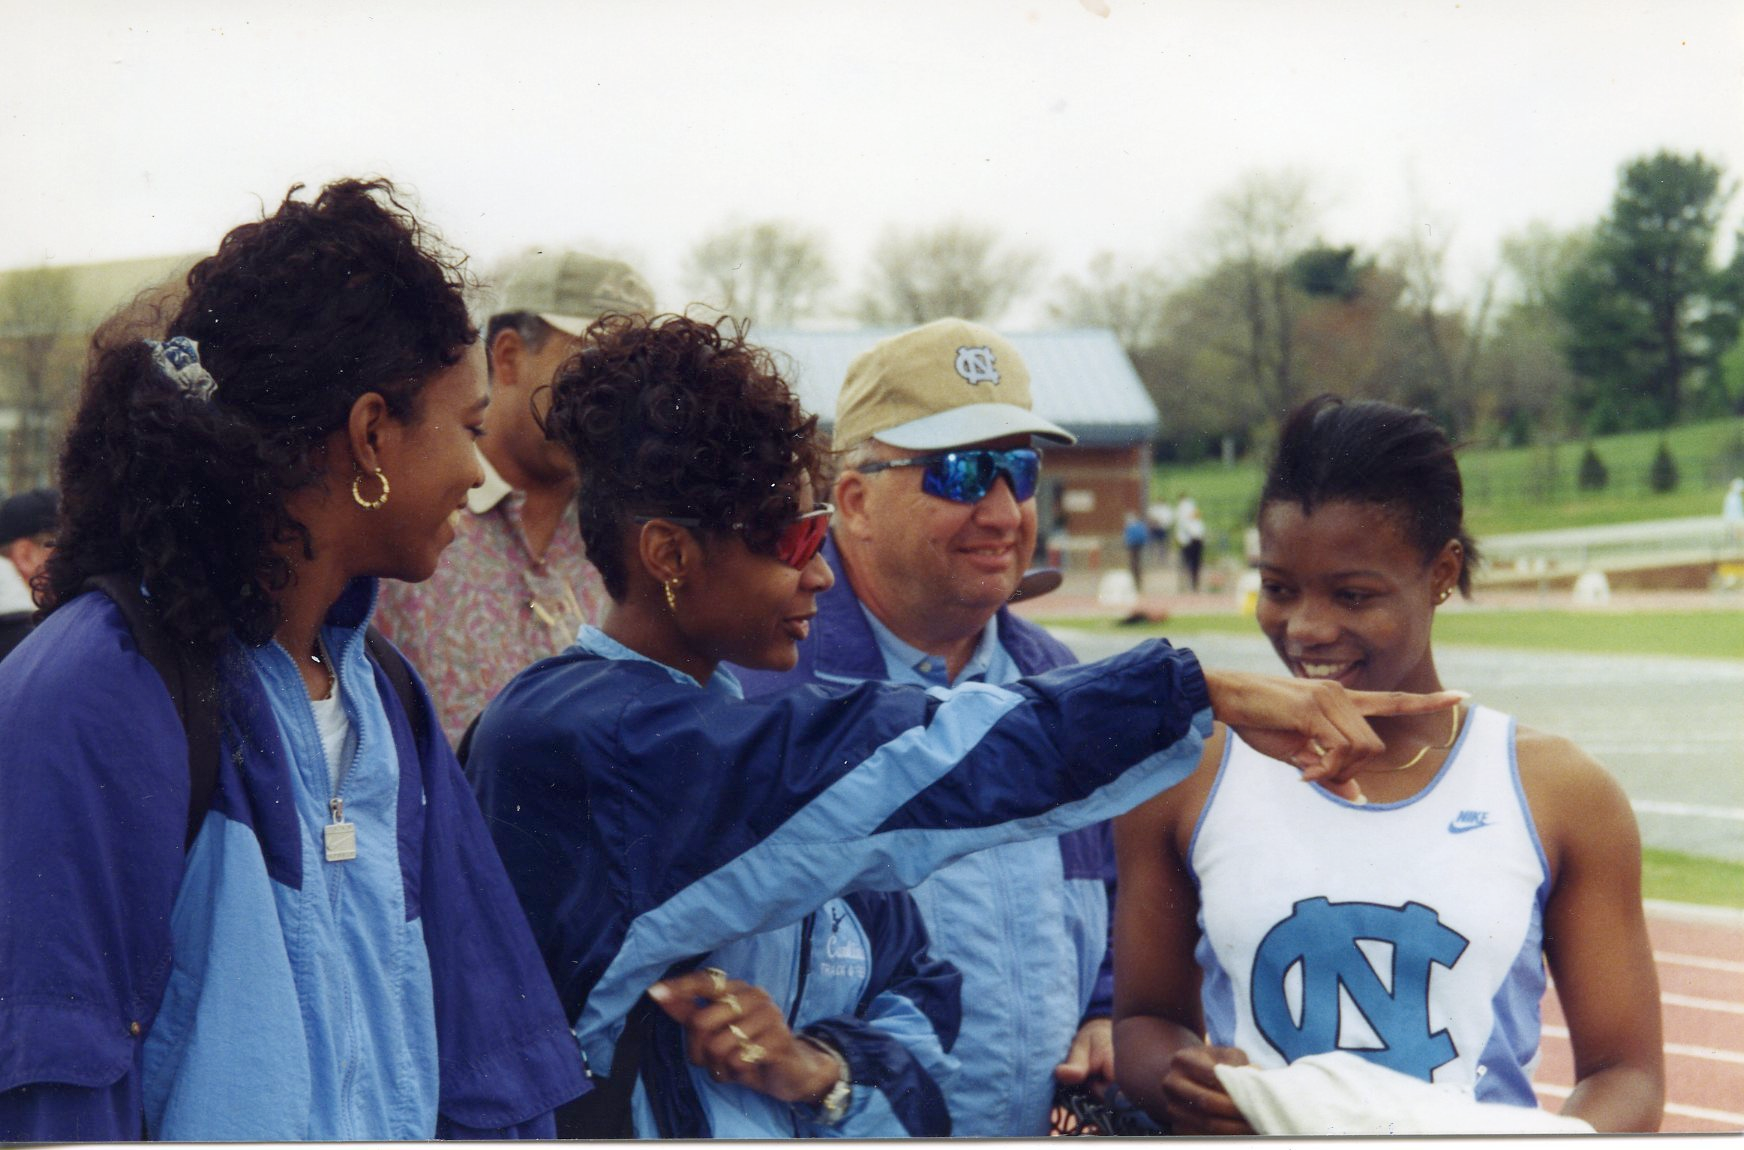 Frye's Five - A Countdown to the USTFCCCA Hall of Fame